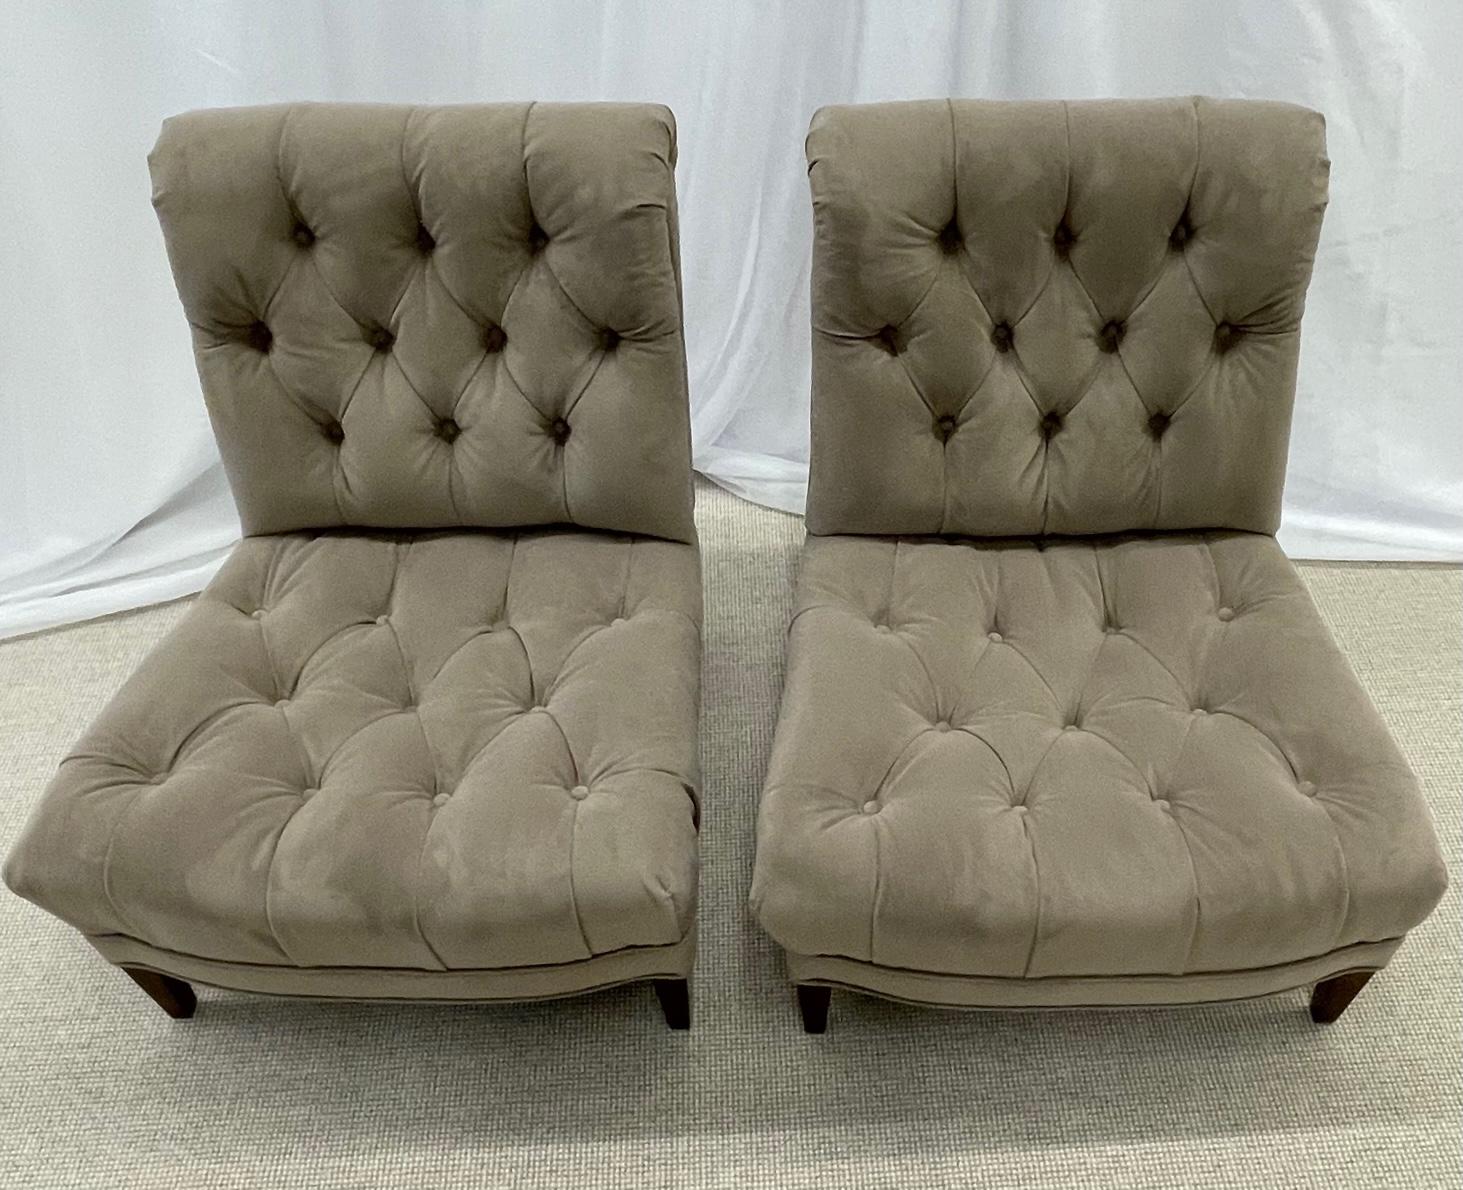 Pair Mid-Century Modern Slipper/Lounge Chairs, American Designer, Tufted, Suede. Each mid century modern chair is strong and sturdy with wide seats and backrests. The whole having brand new suede upholstery with new under cloth. Seat height is 16